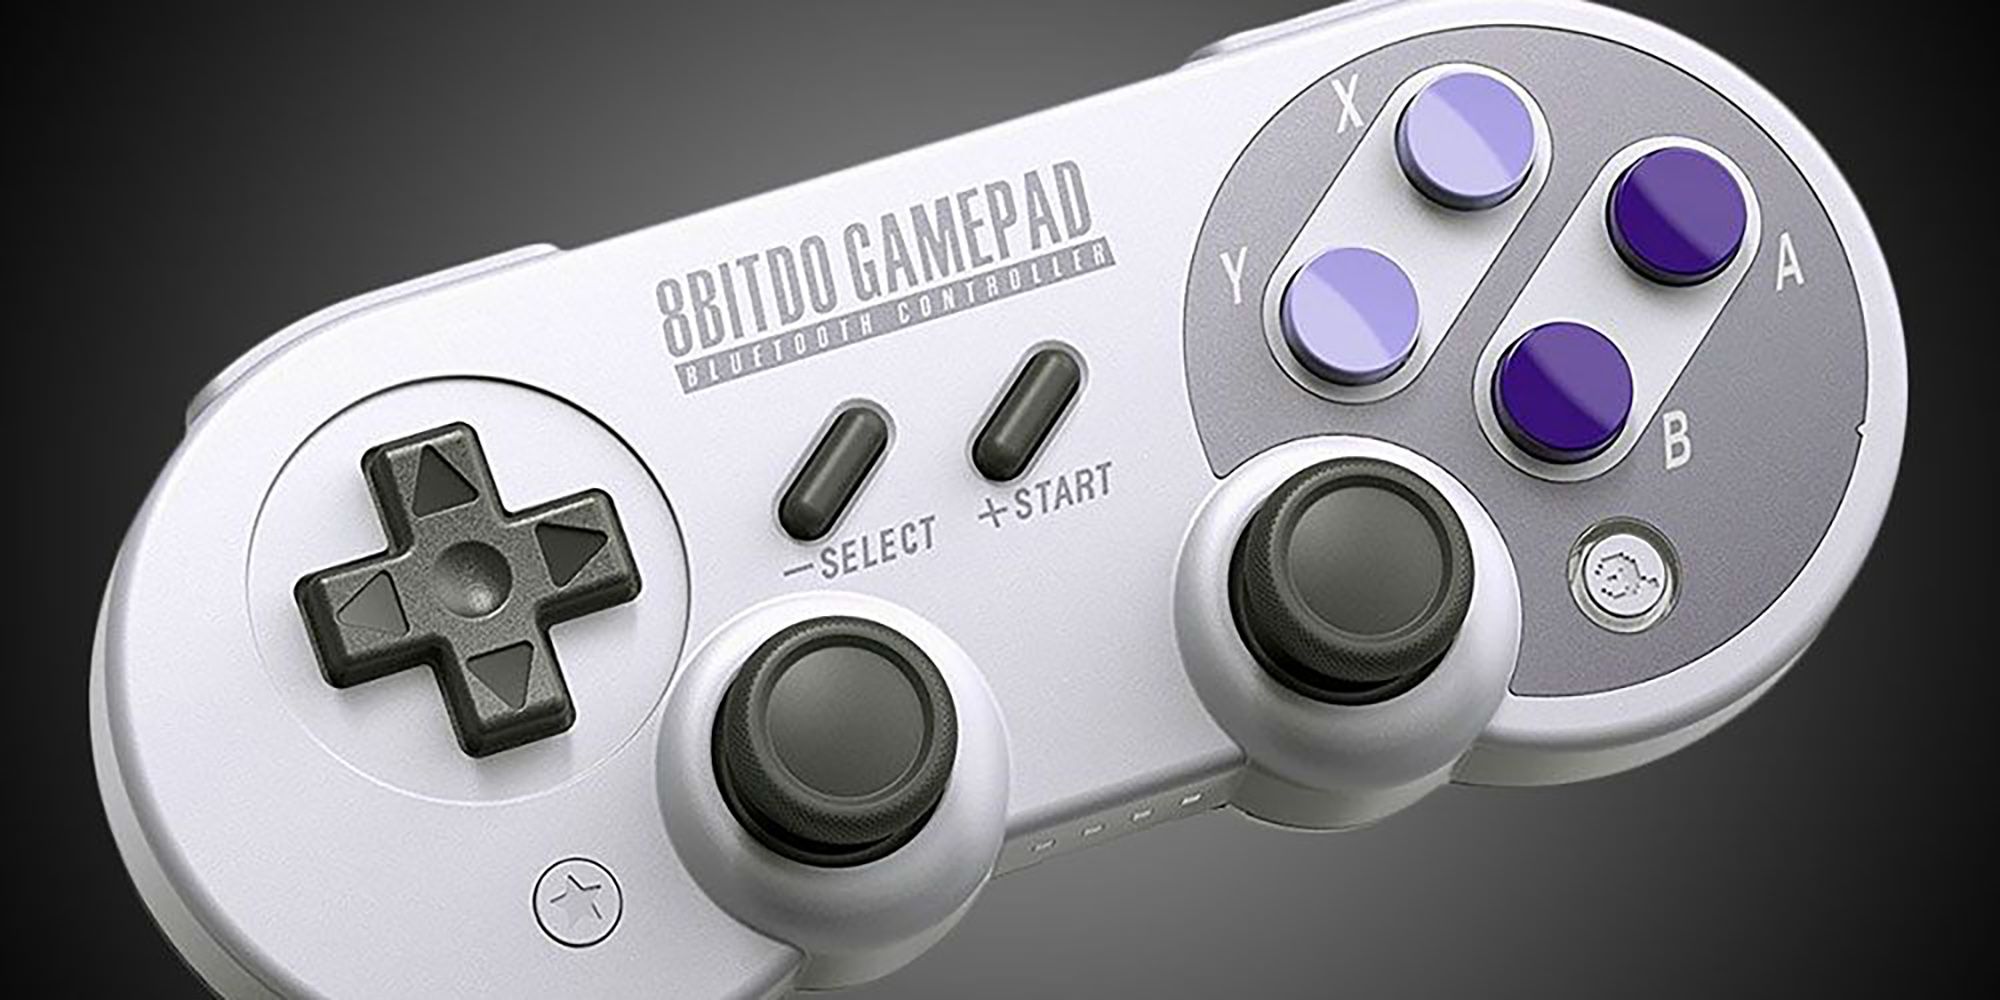 What Are The Best Fighter Game Controllers?